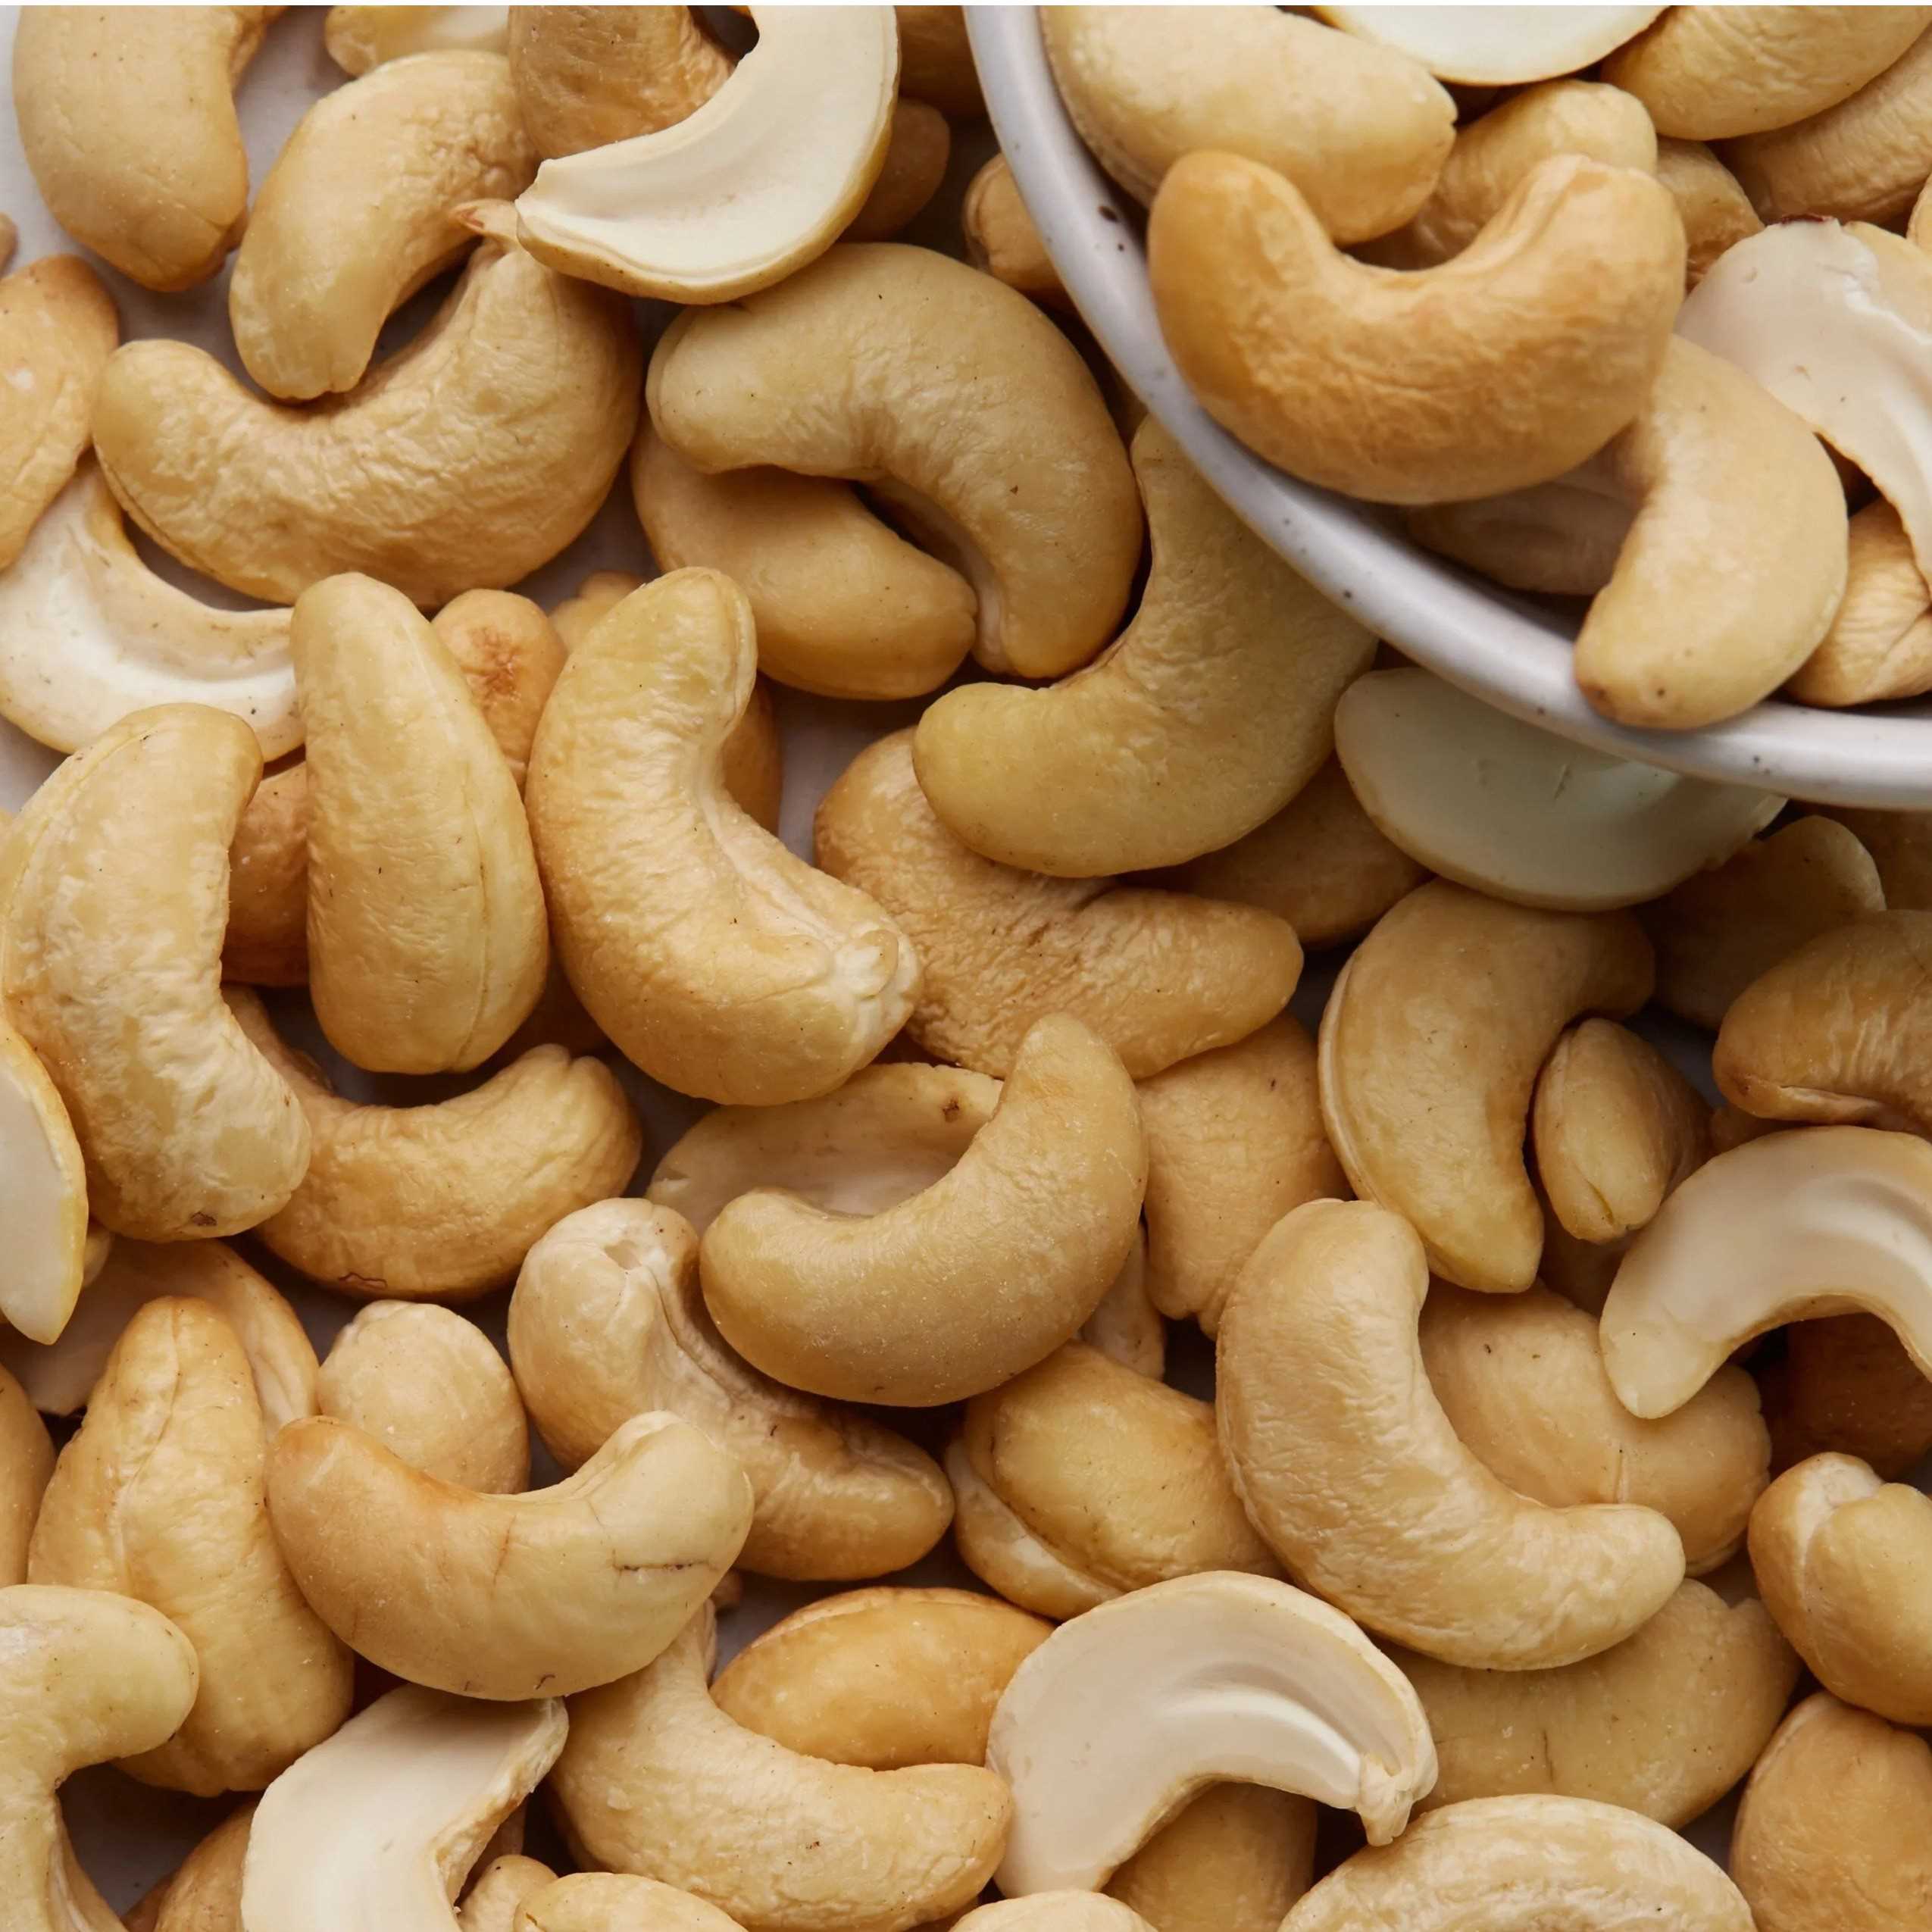 I am looking for Cashew nut